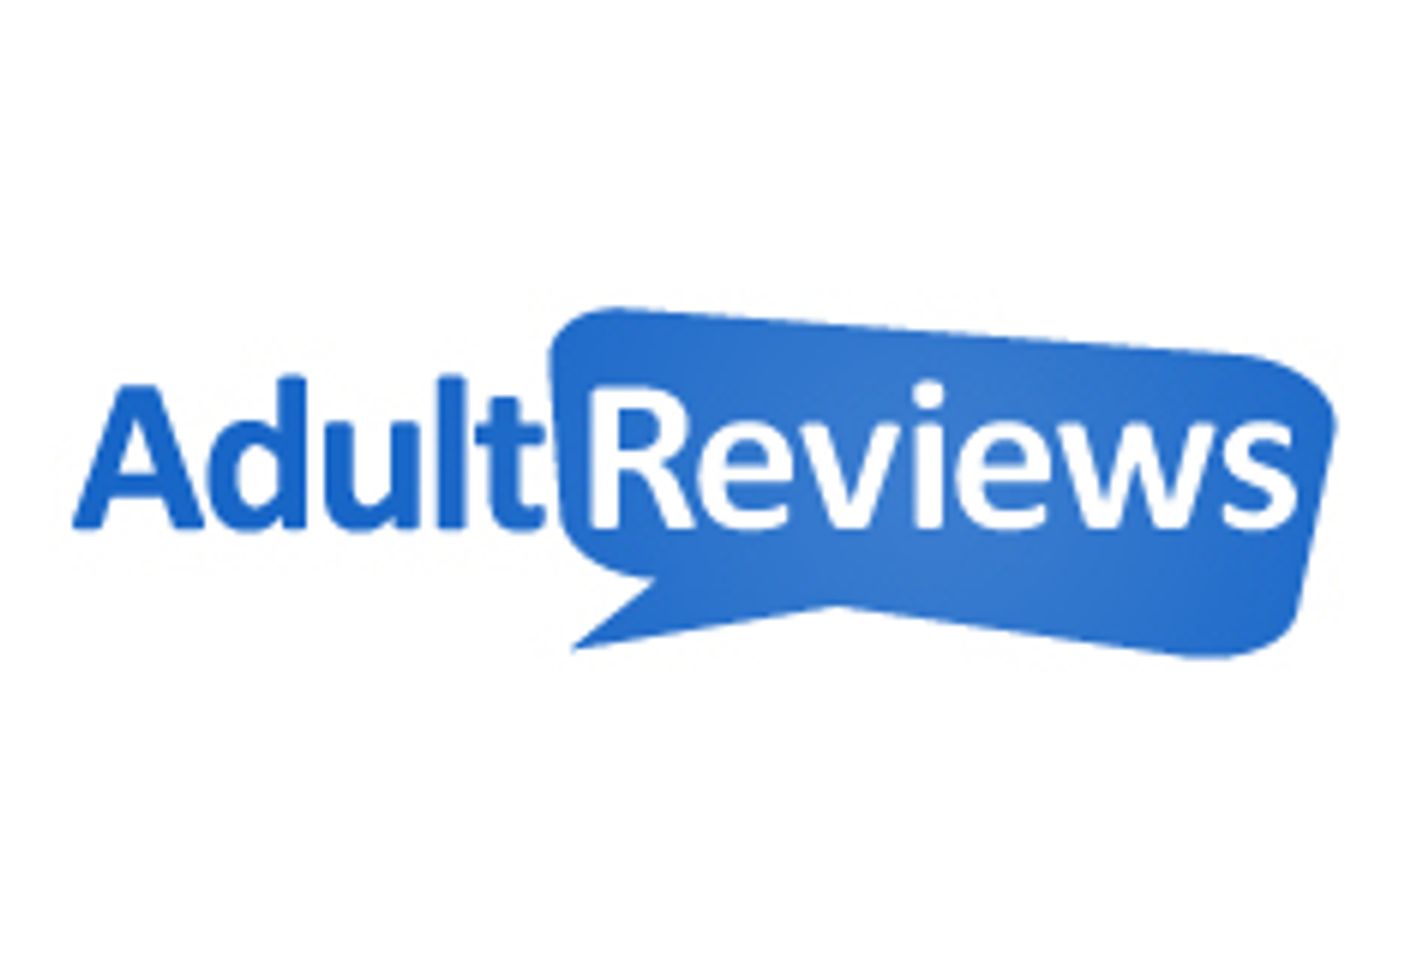 Adultreviews.net Becomes Adultreviews.com